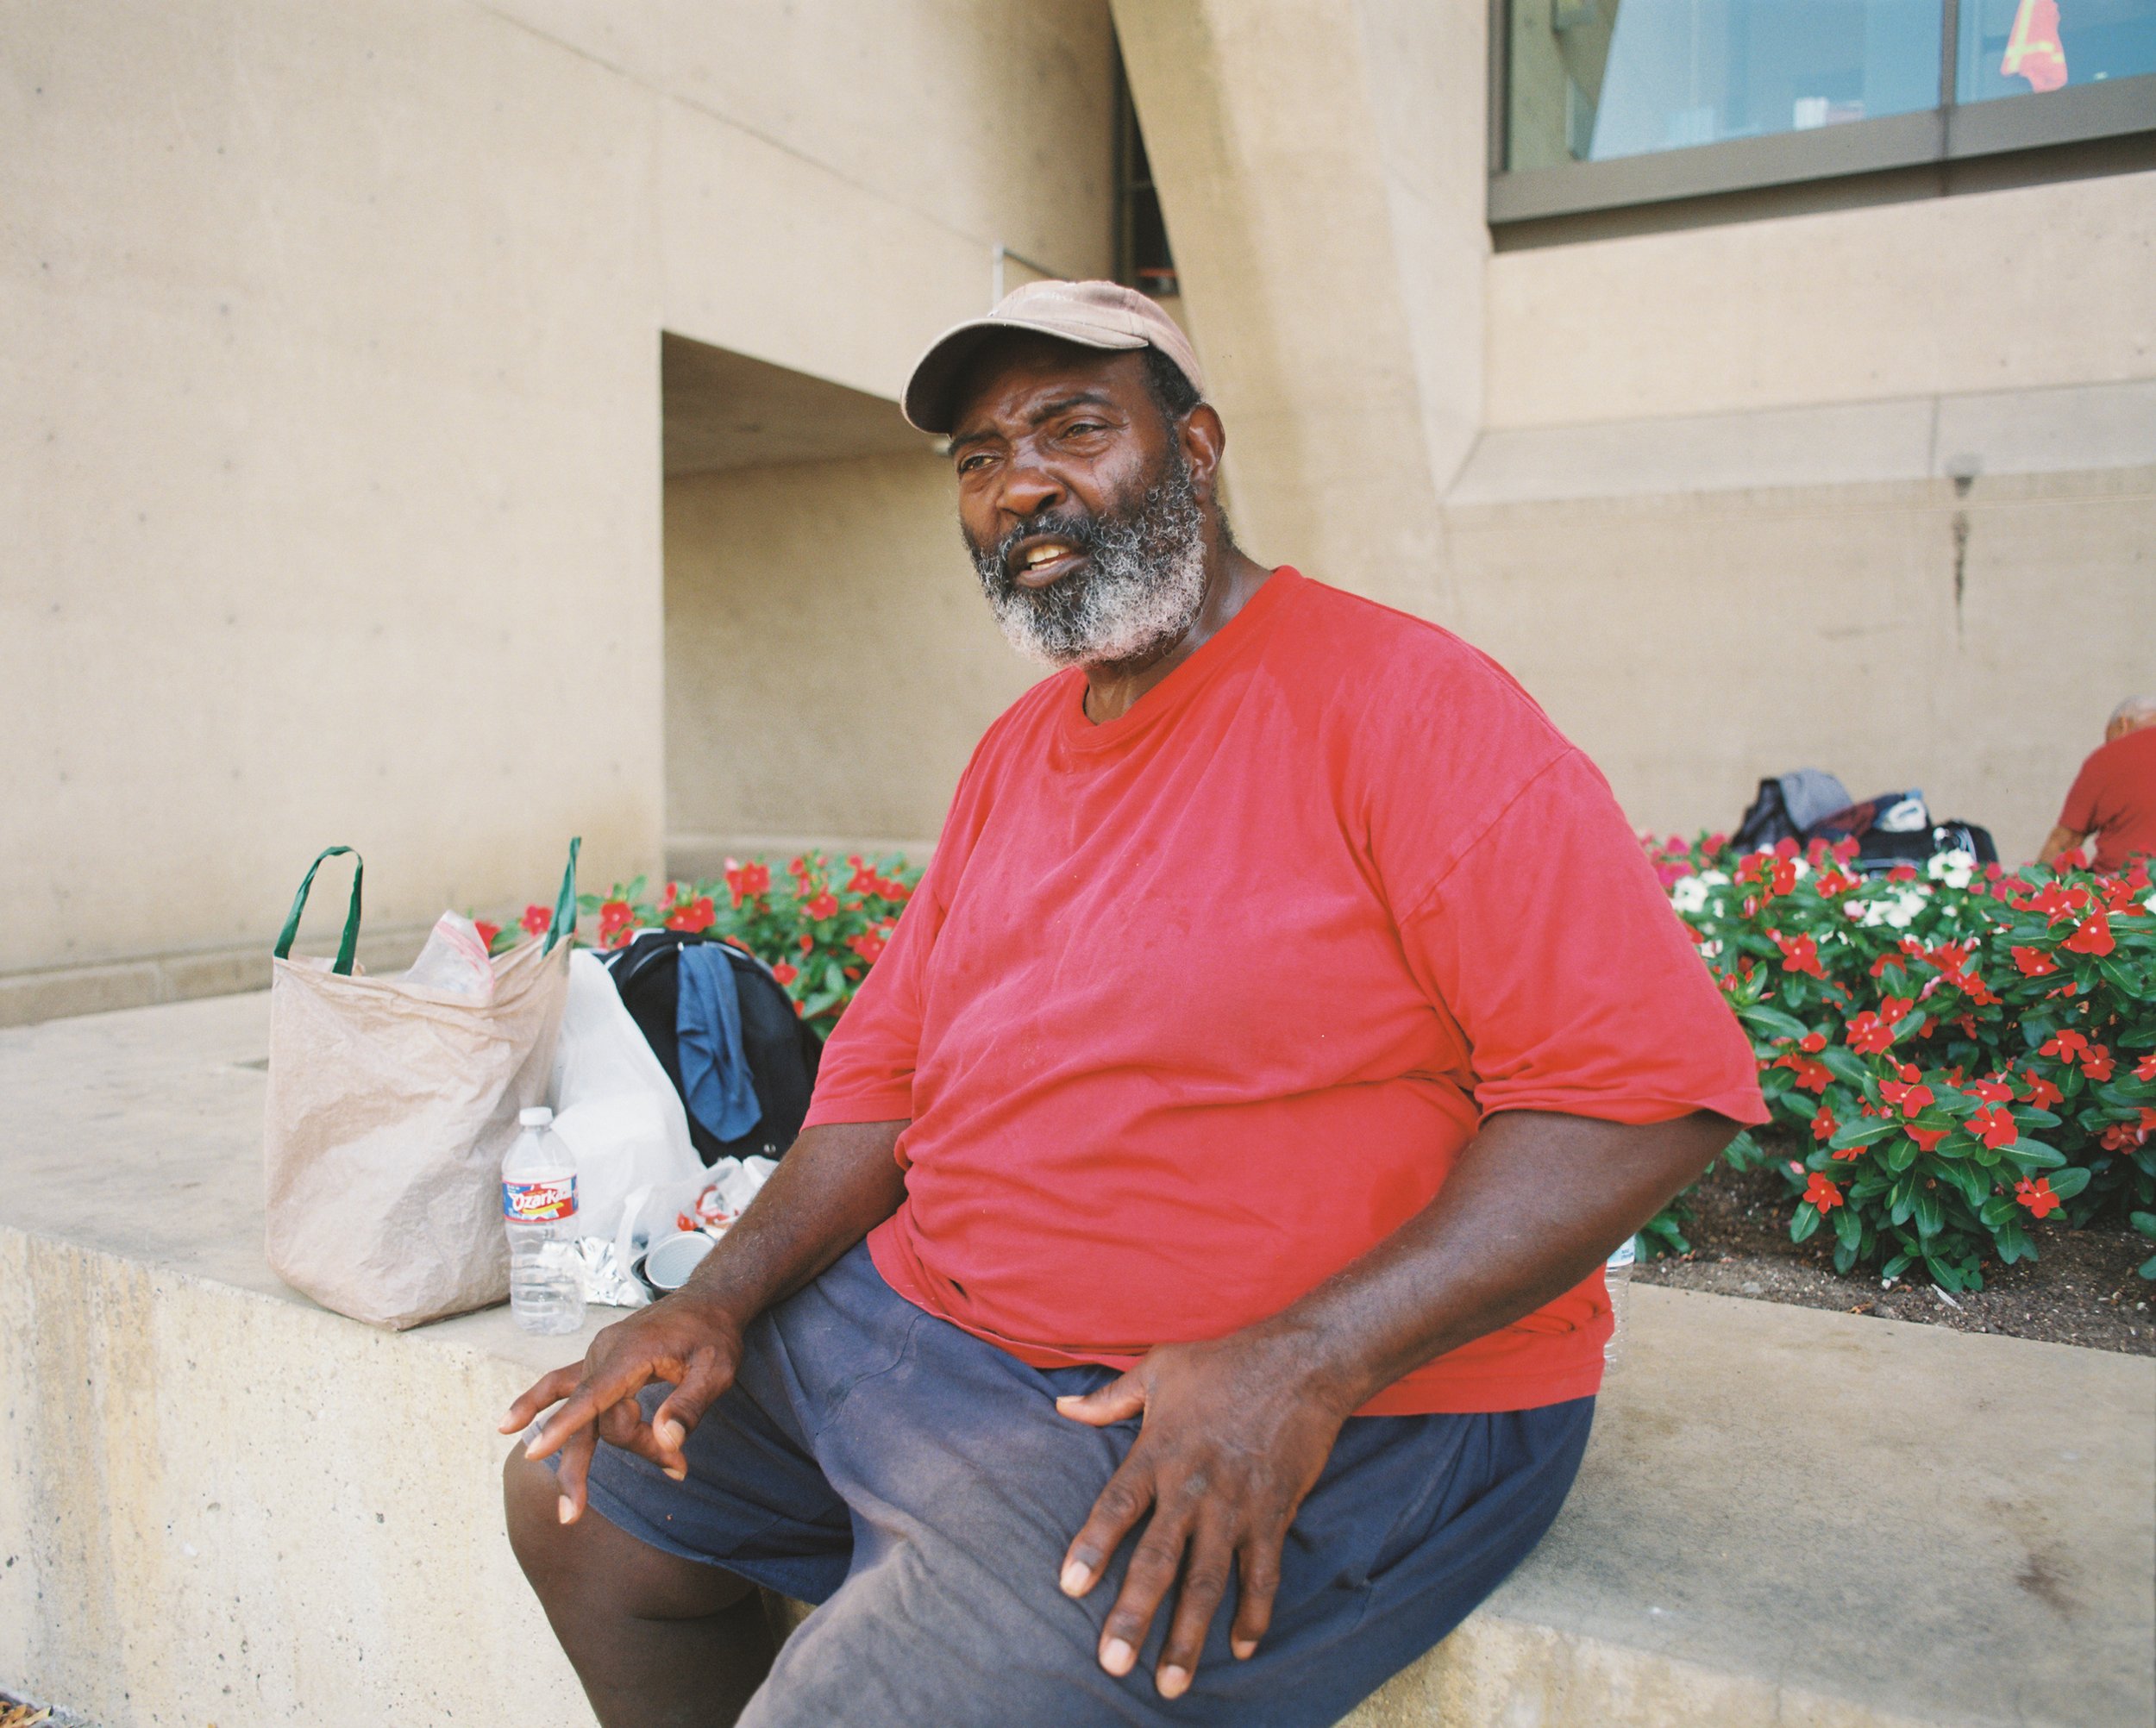  Don says that the problem isn’t the city or the police but that it’s the younger generation of homeless people that make it harder for the ones that want out of the streets. “The younger generation is the ones that keep the stigmas alive,” he says. 